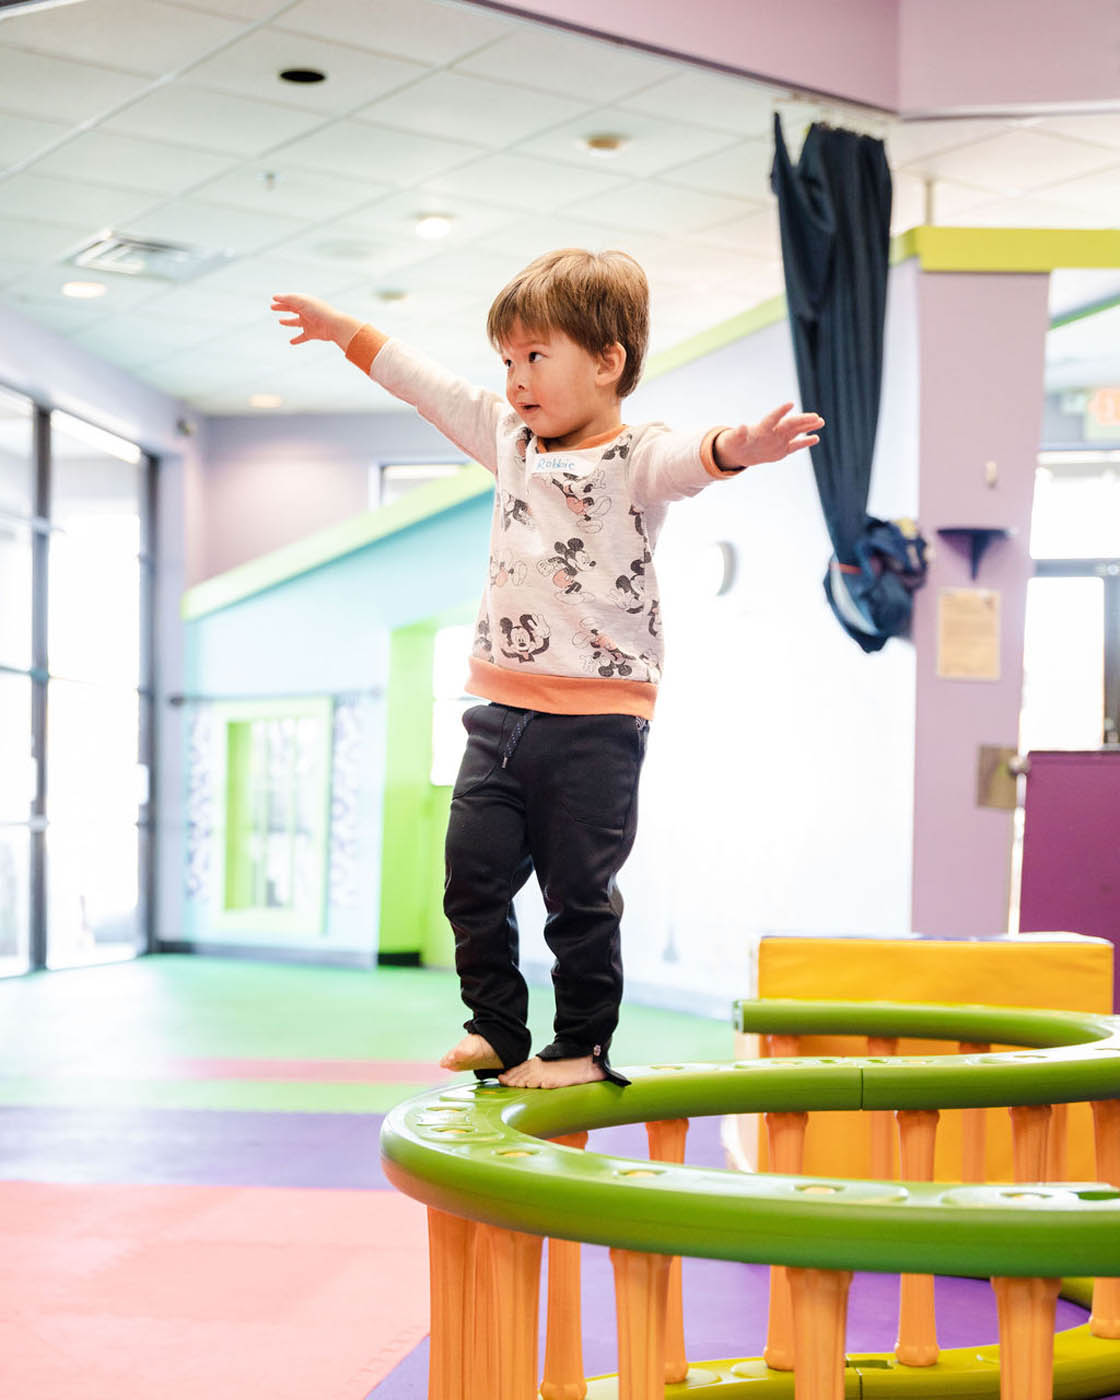 A little boy balancing on gym equipment, contact us today about our playgroup in Willow Grove, PA.